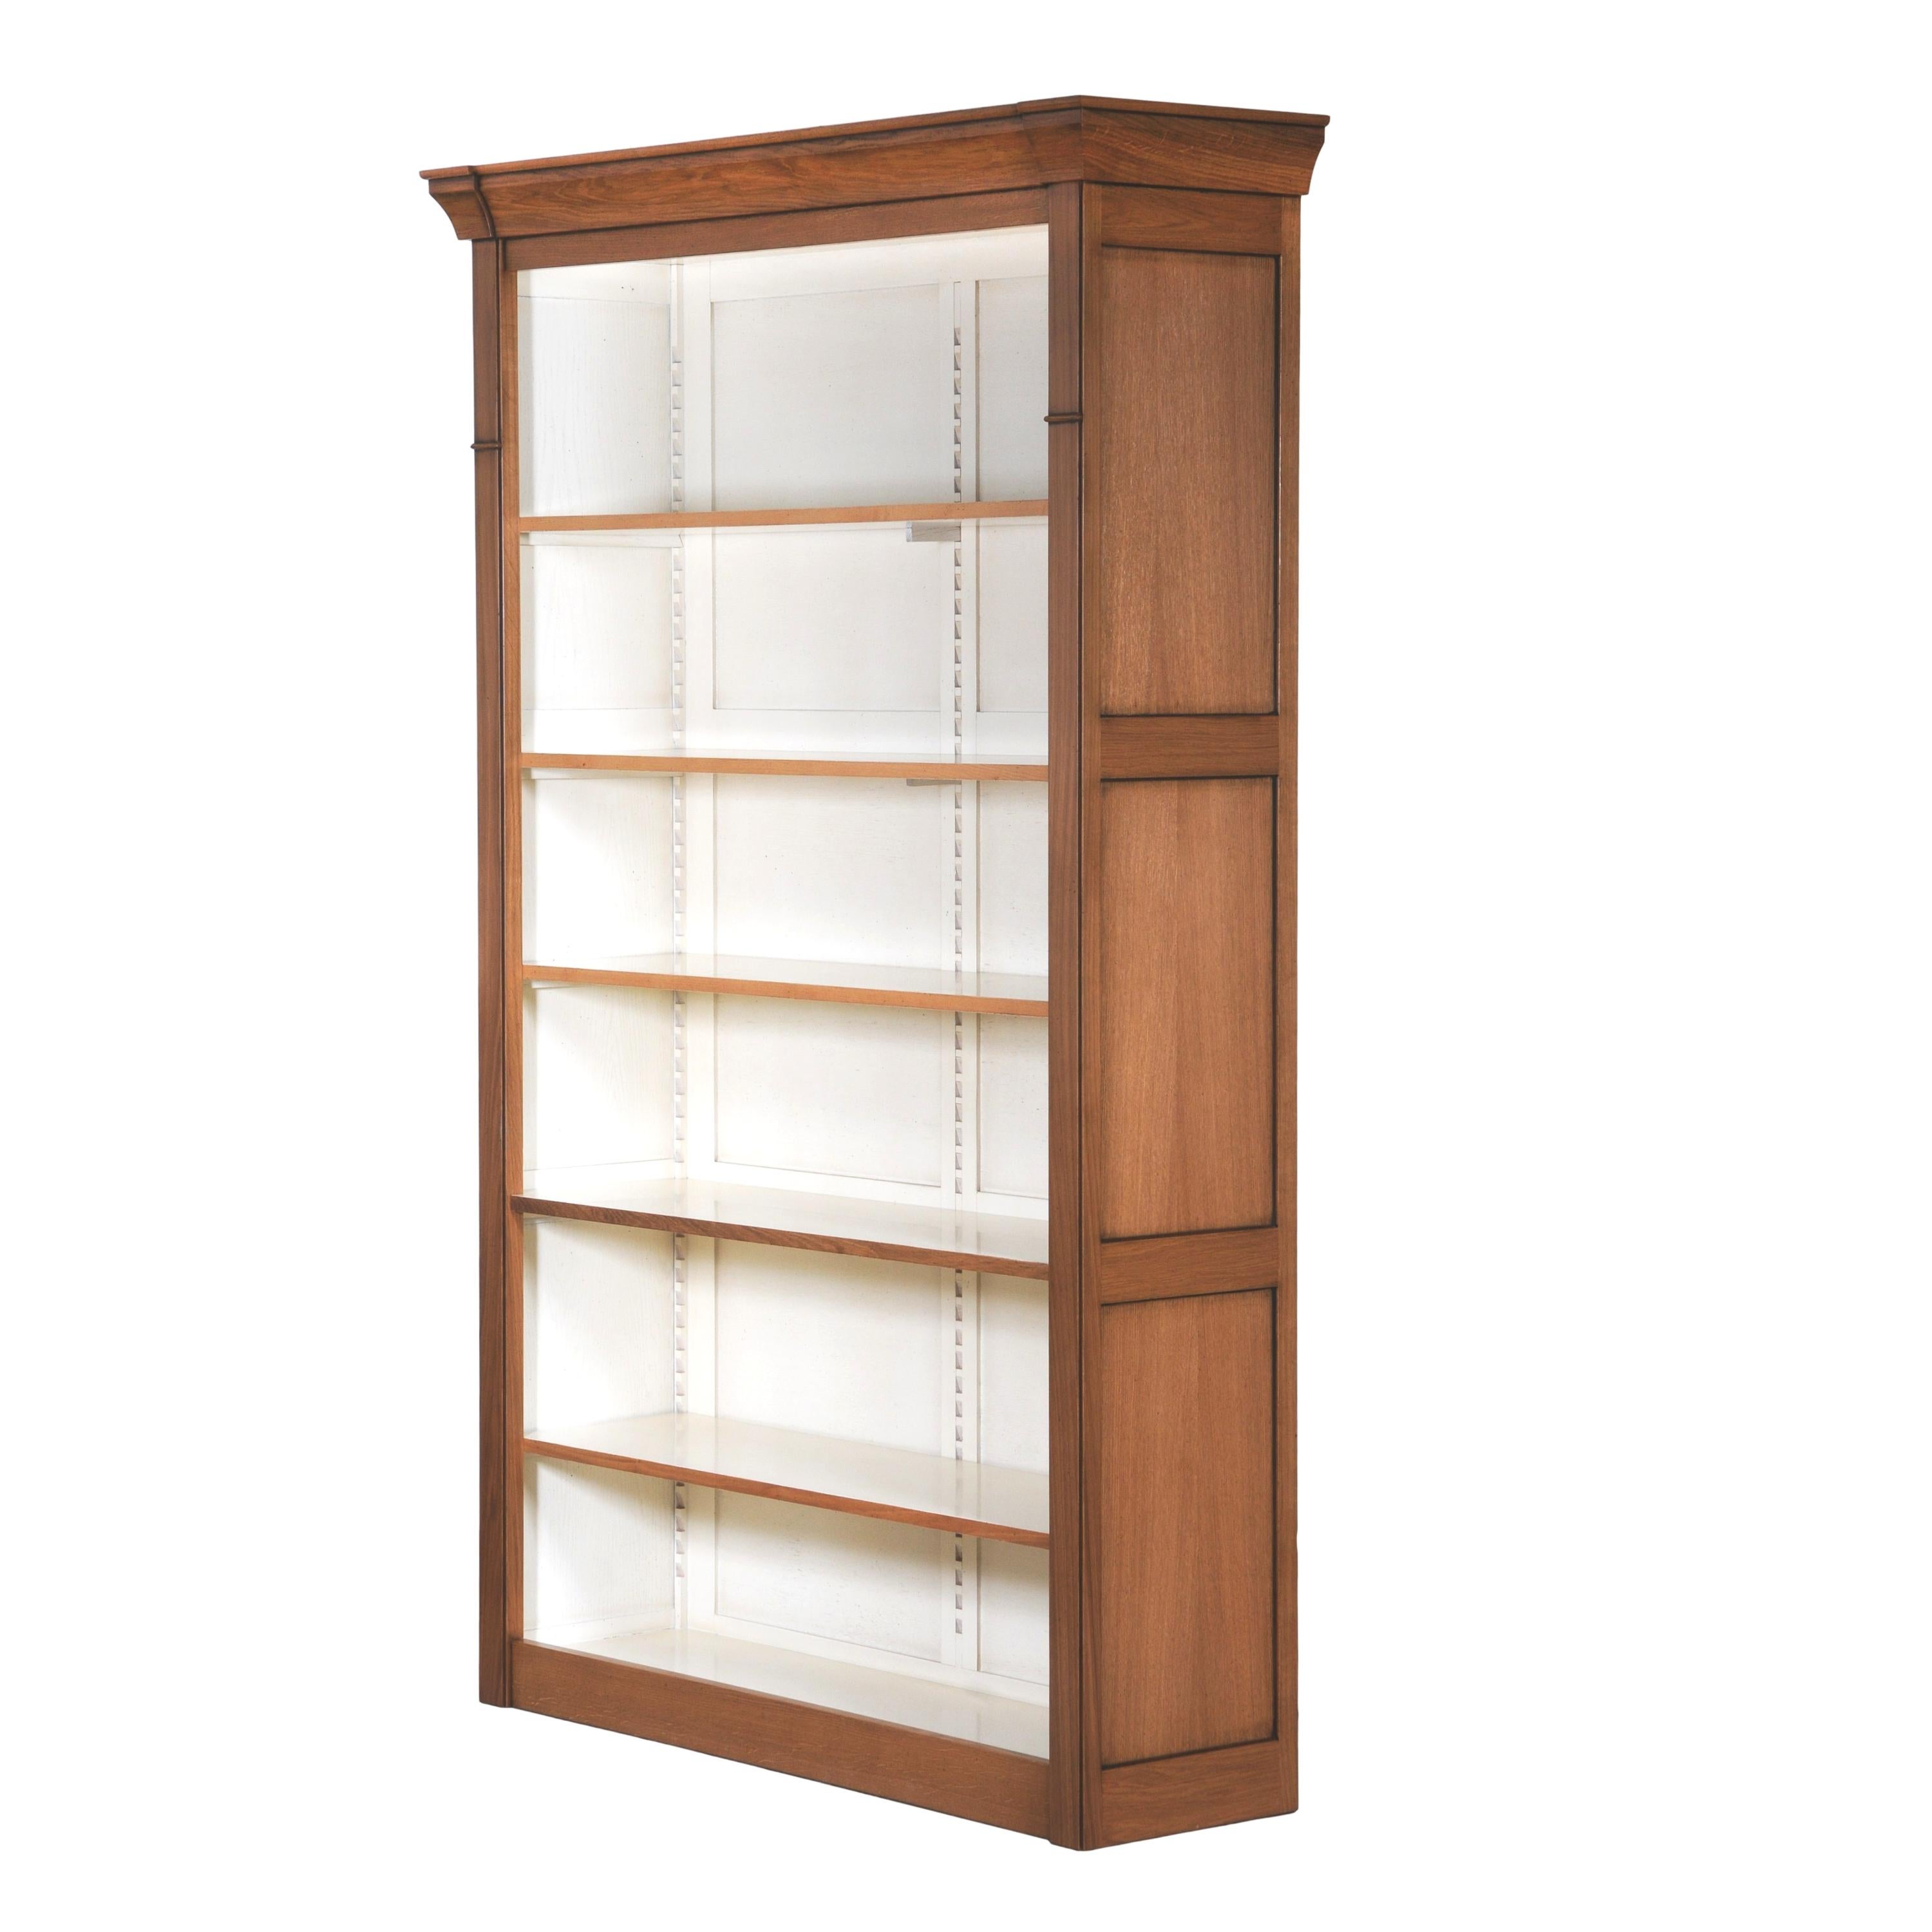 This classical bookcase Unit is made of French Oak. It can be combined with other units to get a full wall of bookcases.

This unit has one fixed wooden shelf + 3 removable and adjustable shelves wooden racks

Inside dimensions are : Length 140